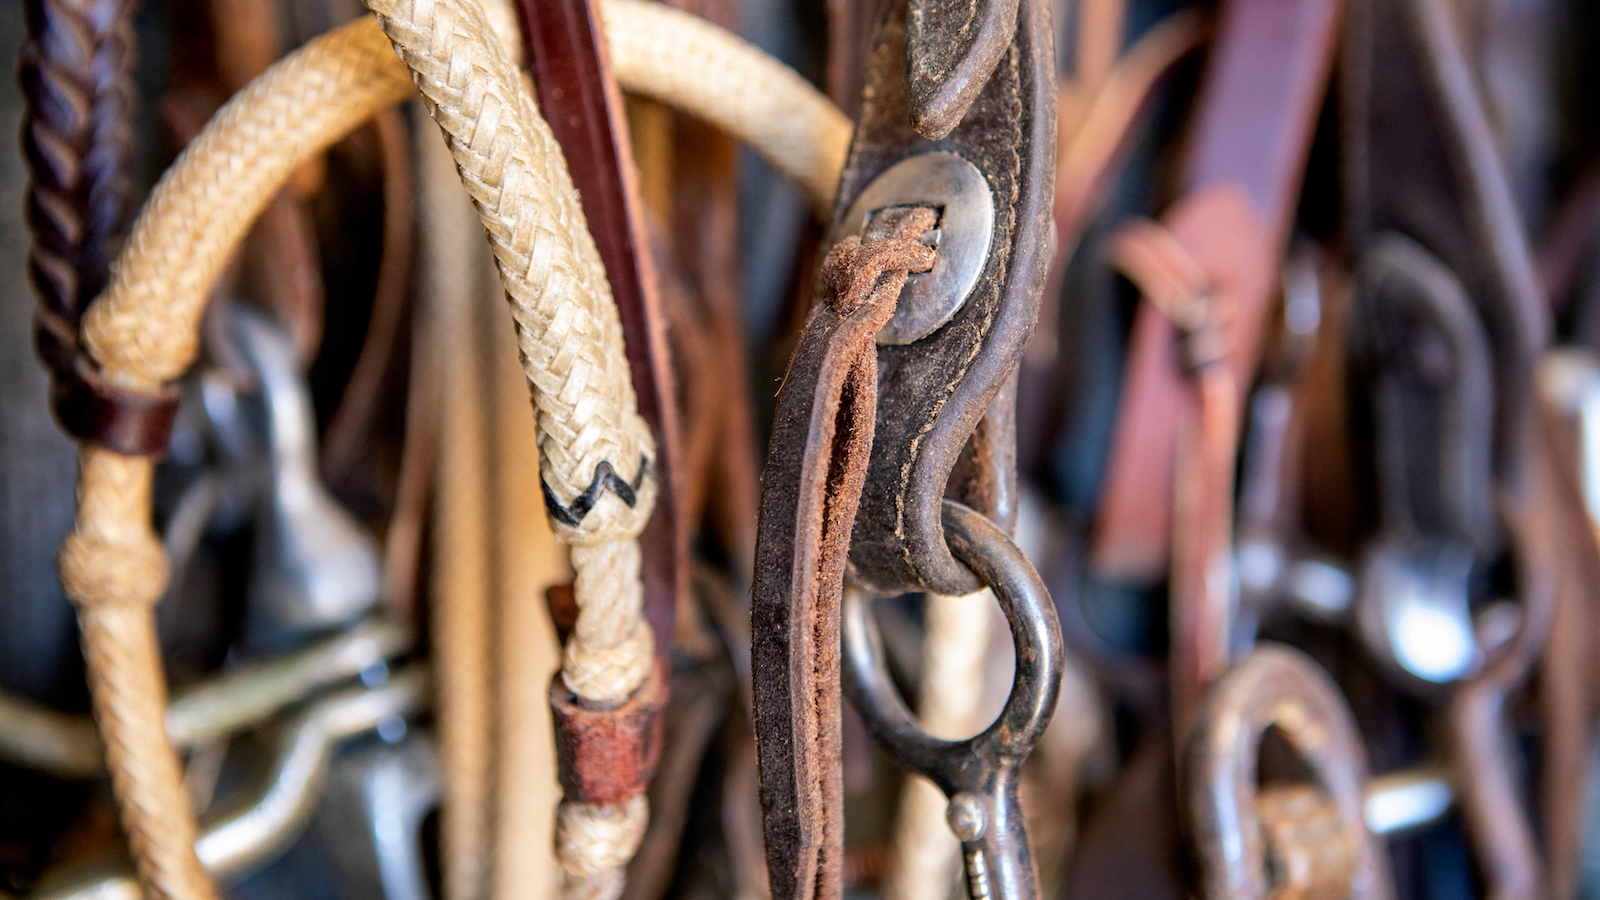 Blood knot on a bridle